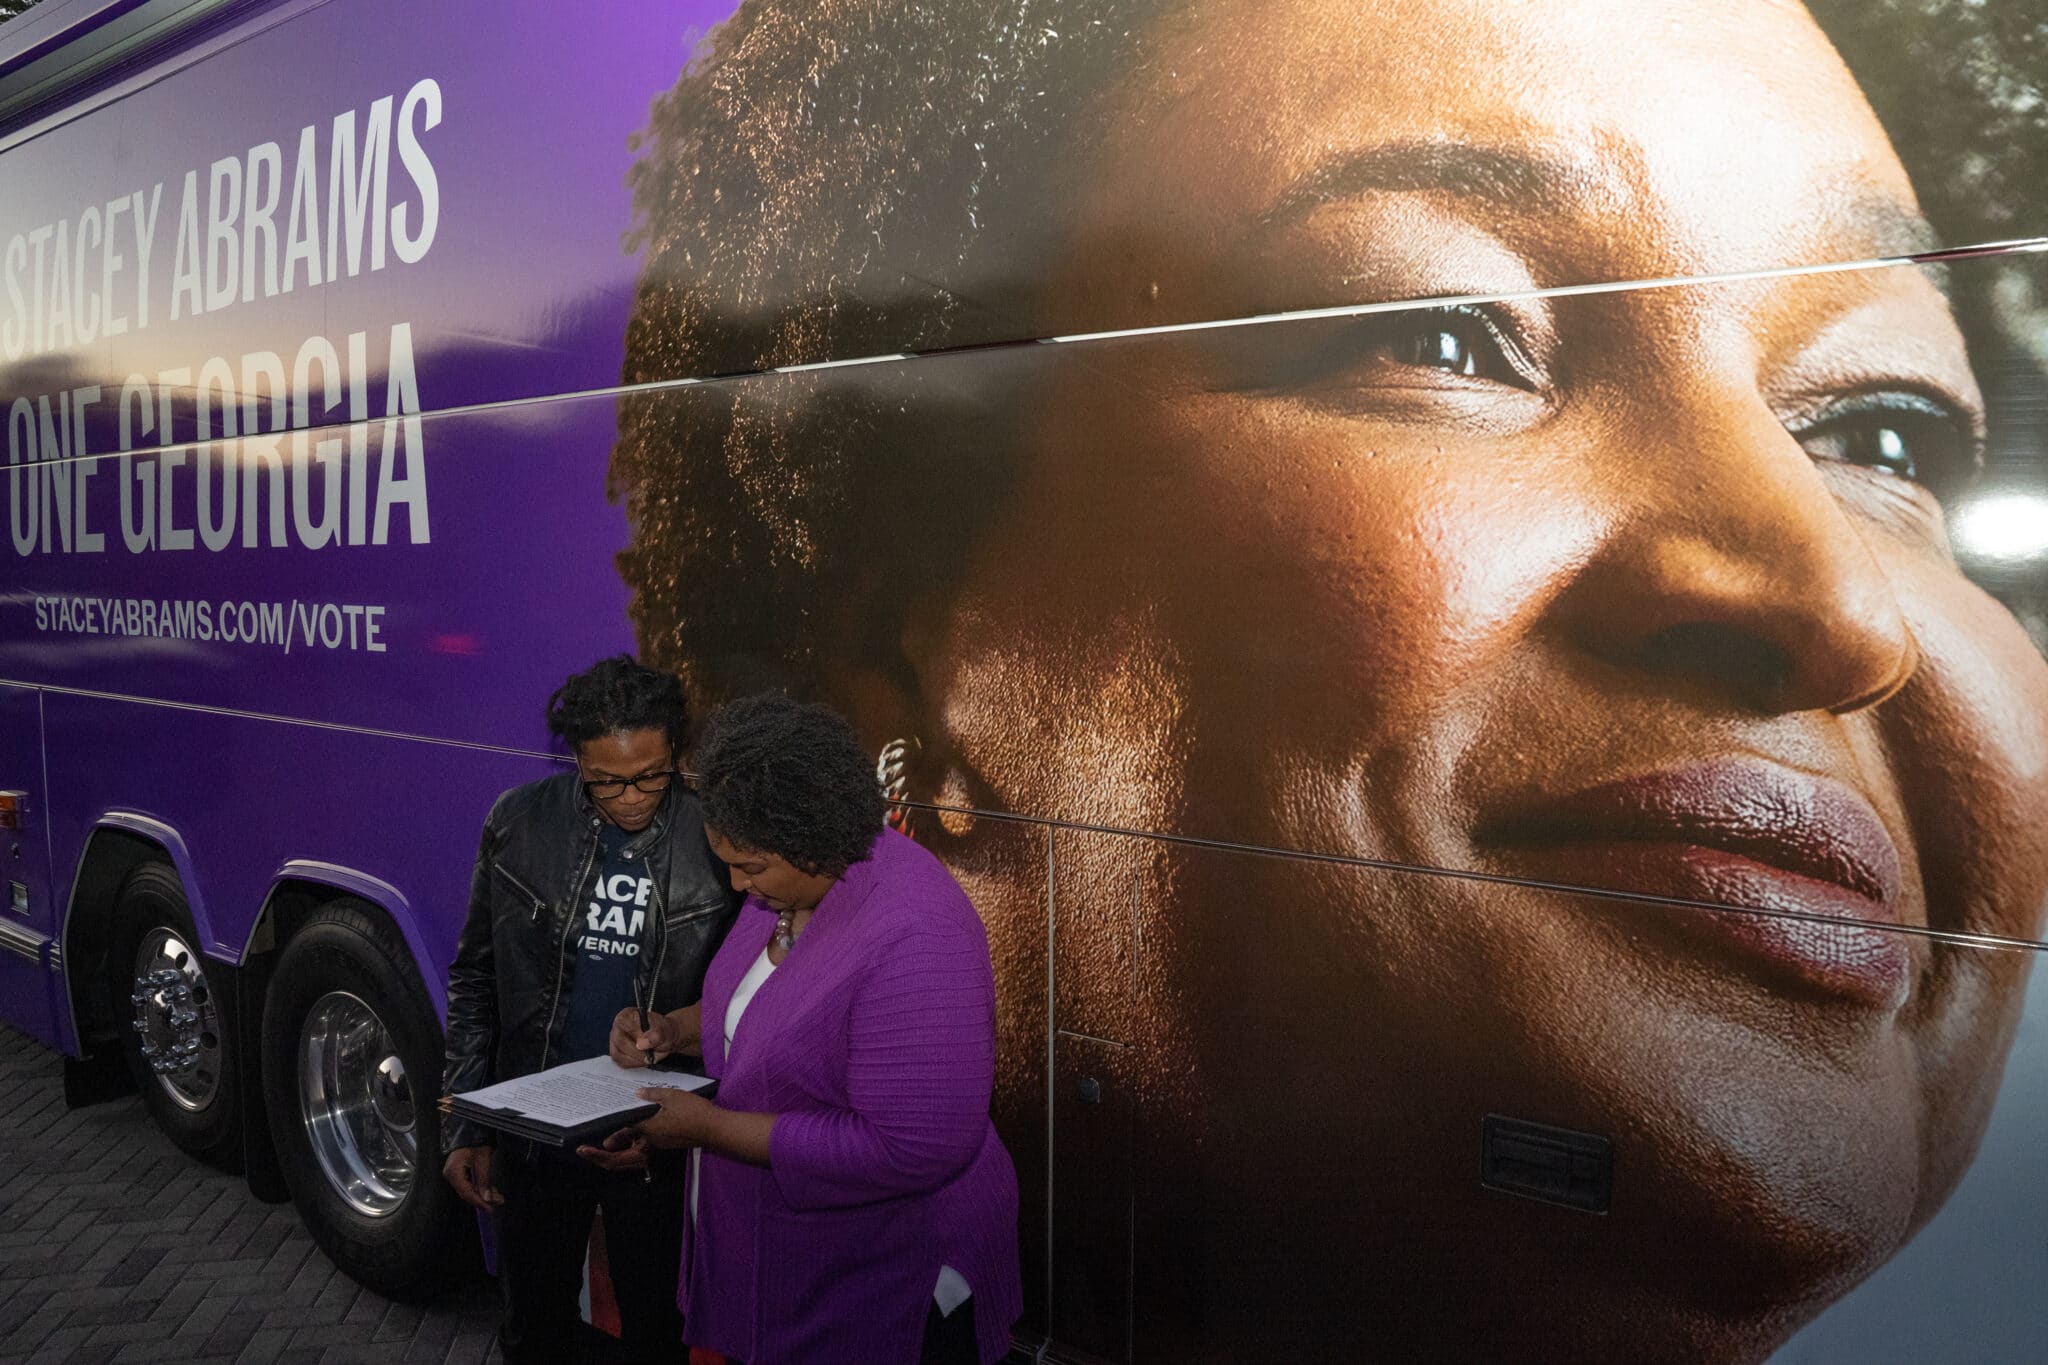 JONESBORO, GA - OCTOBER 18:  Georgia Democratic gubernatorial candidate Stacey Abrams arrives for a campaign event as early voting begins on October 18, 2022 in Jonesboro, Georgia. Abrams is facing incumbent Gov. Brian Kemp, whom she narrowly lost to in 2018.  (Photo by Megan Varner/Getty Images)